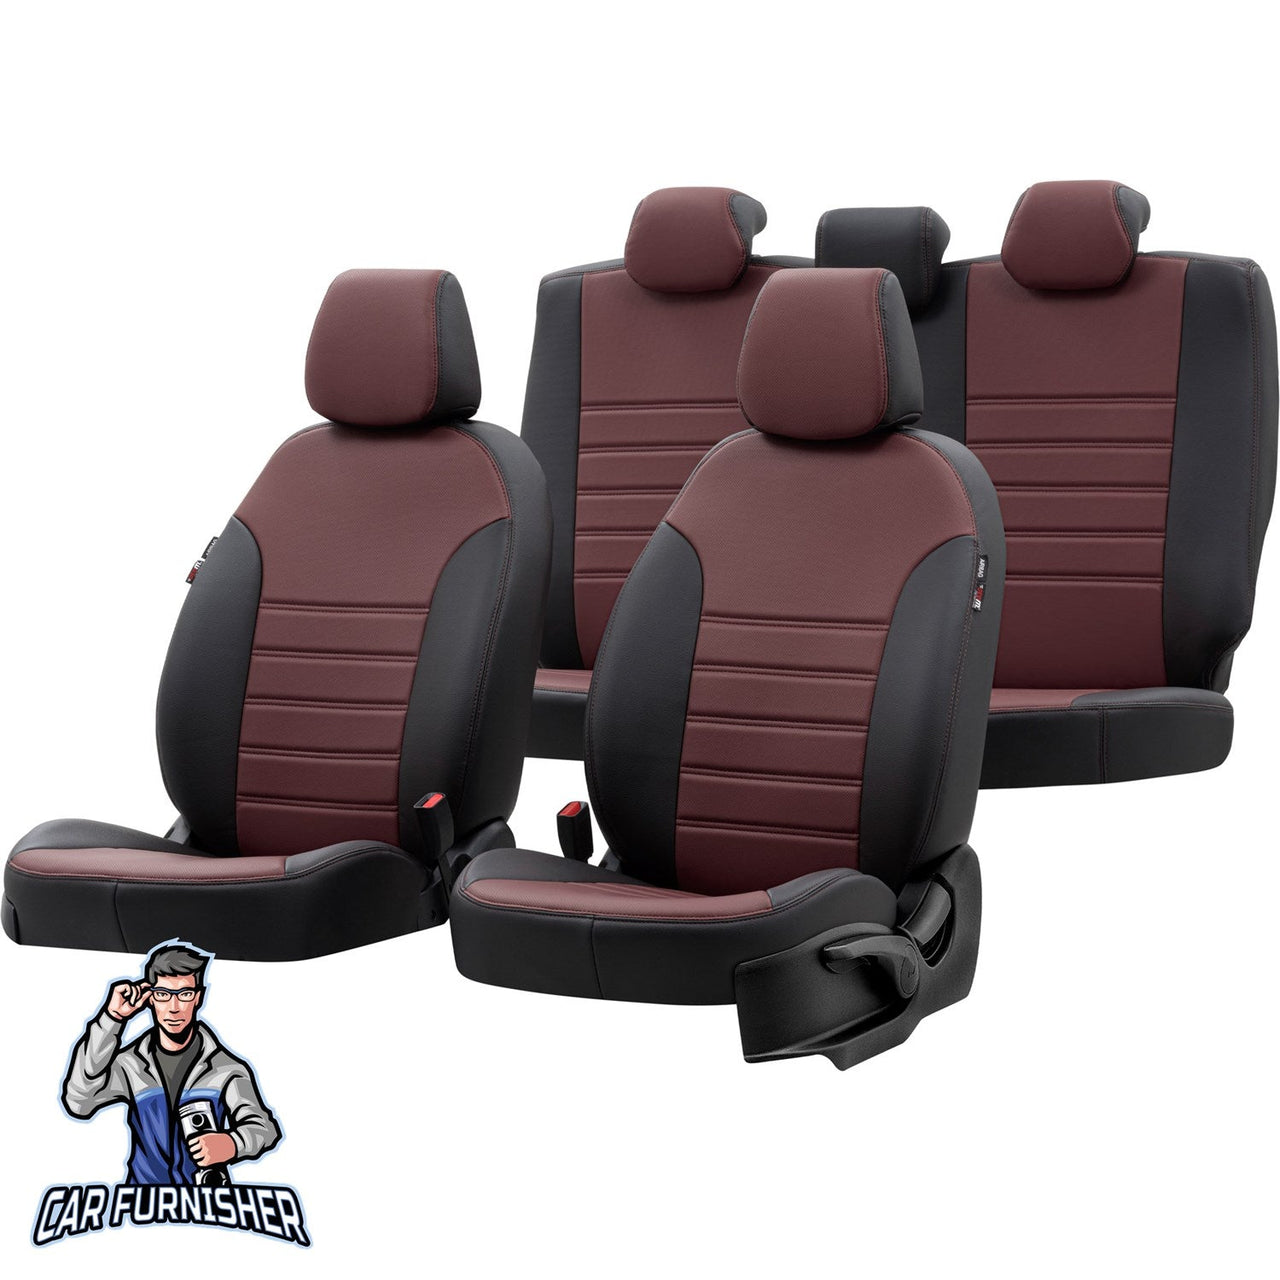 Jeep Wrangler Seat Covers Istanbul Leather Design Burgundy Leather